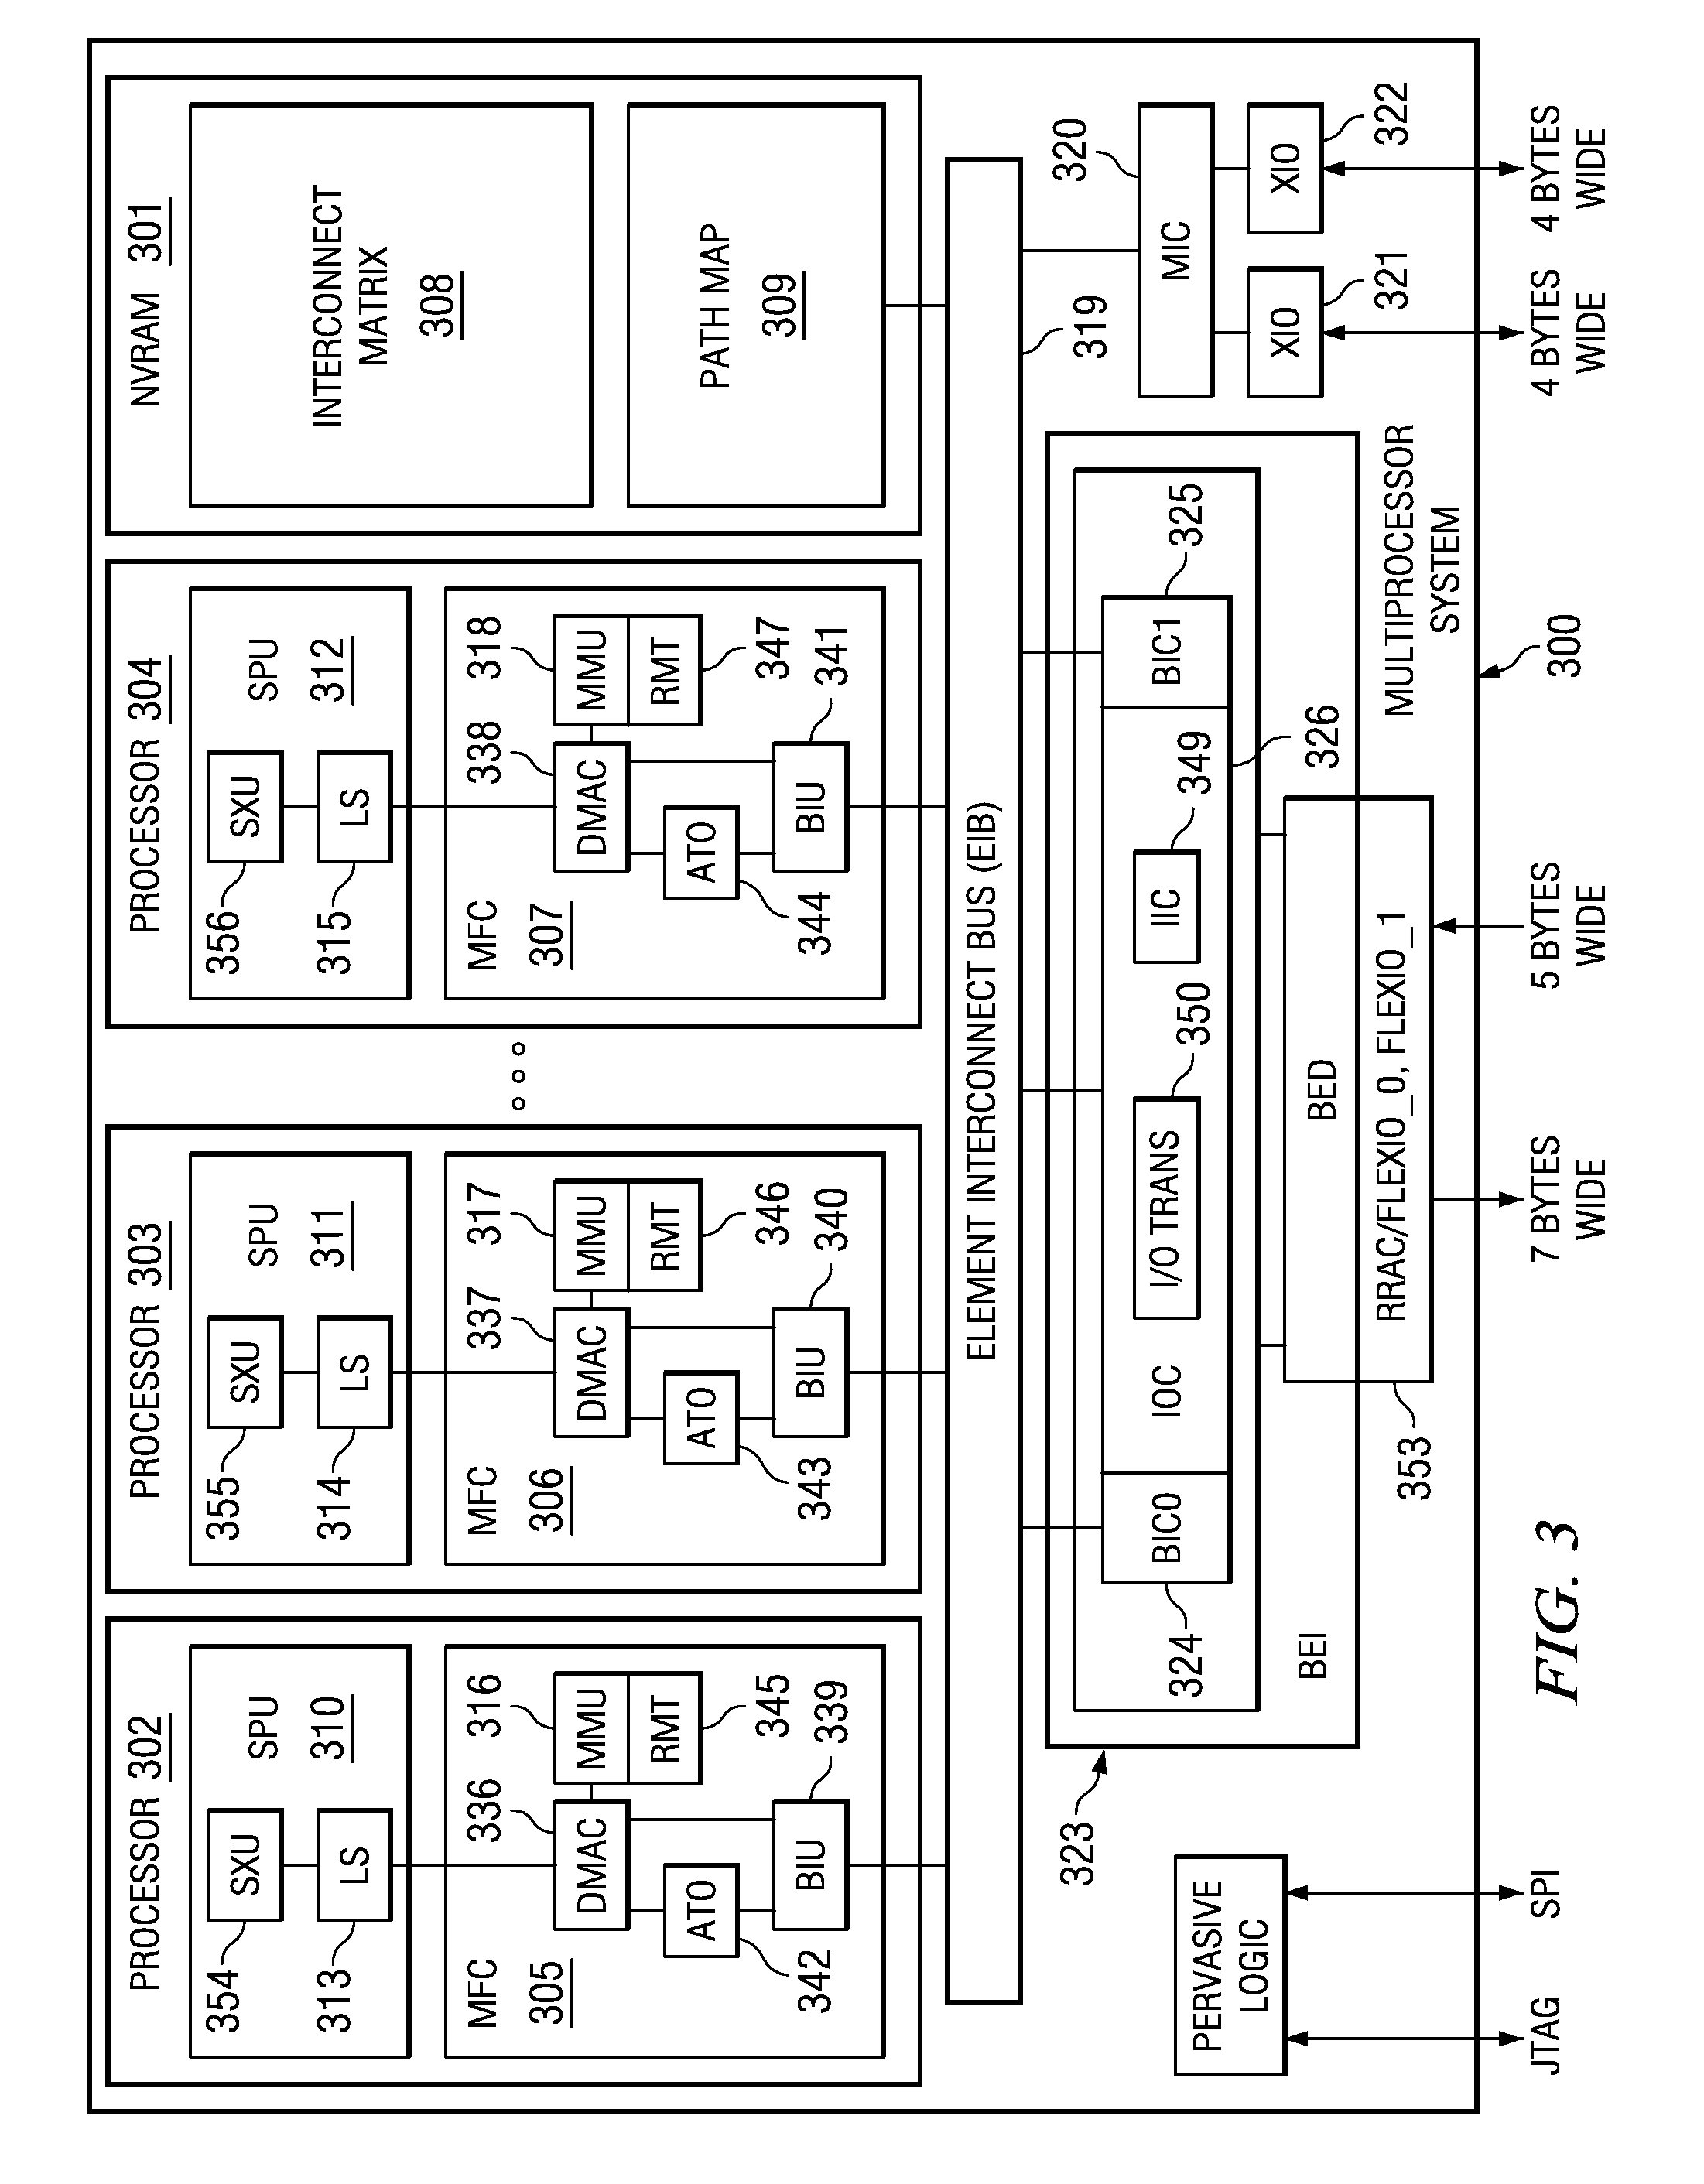 Method and Apparatus for Self-Healing Symmetric Multi-Processor System Interconnects